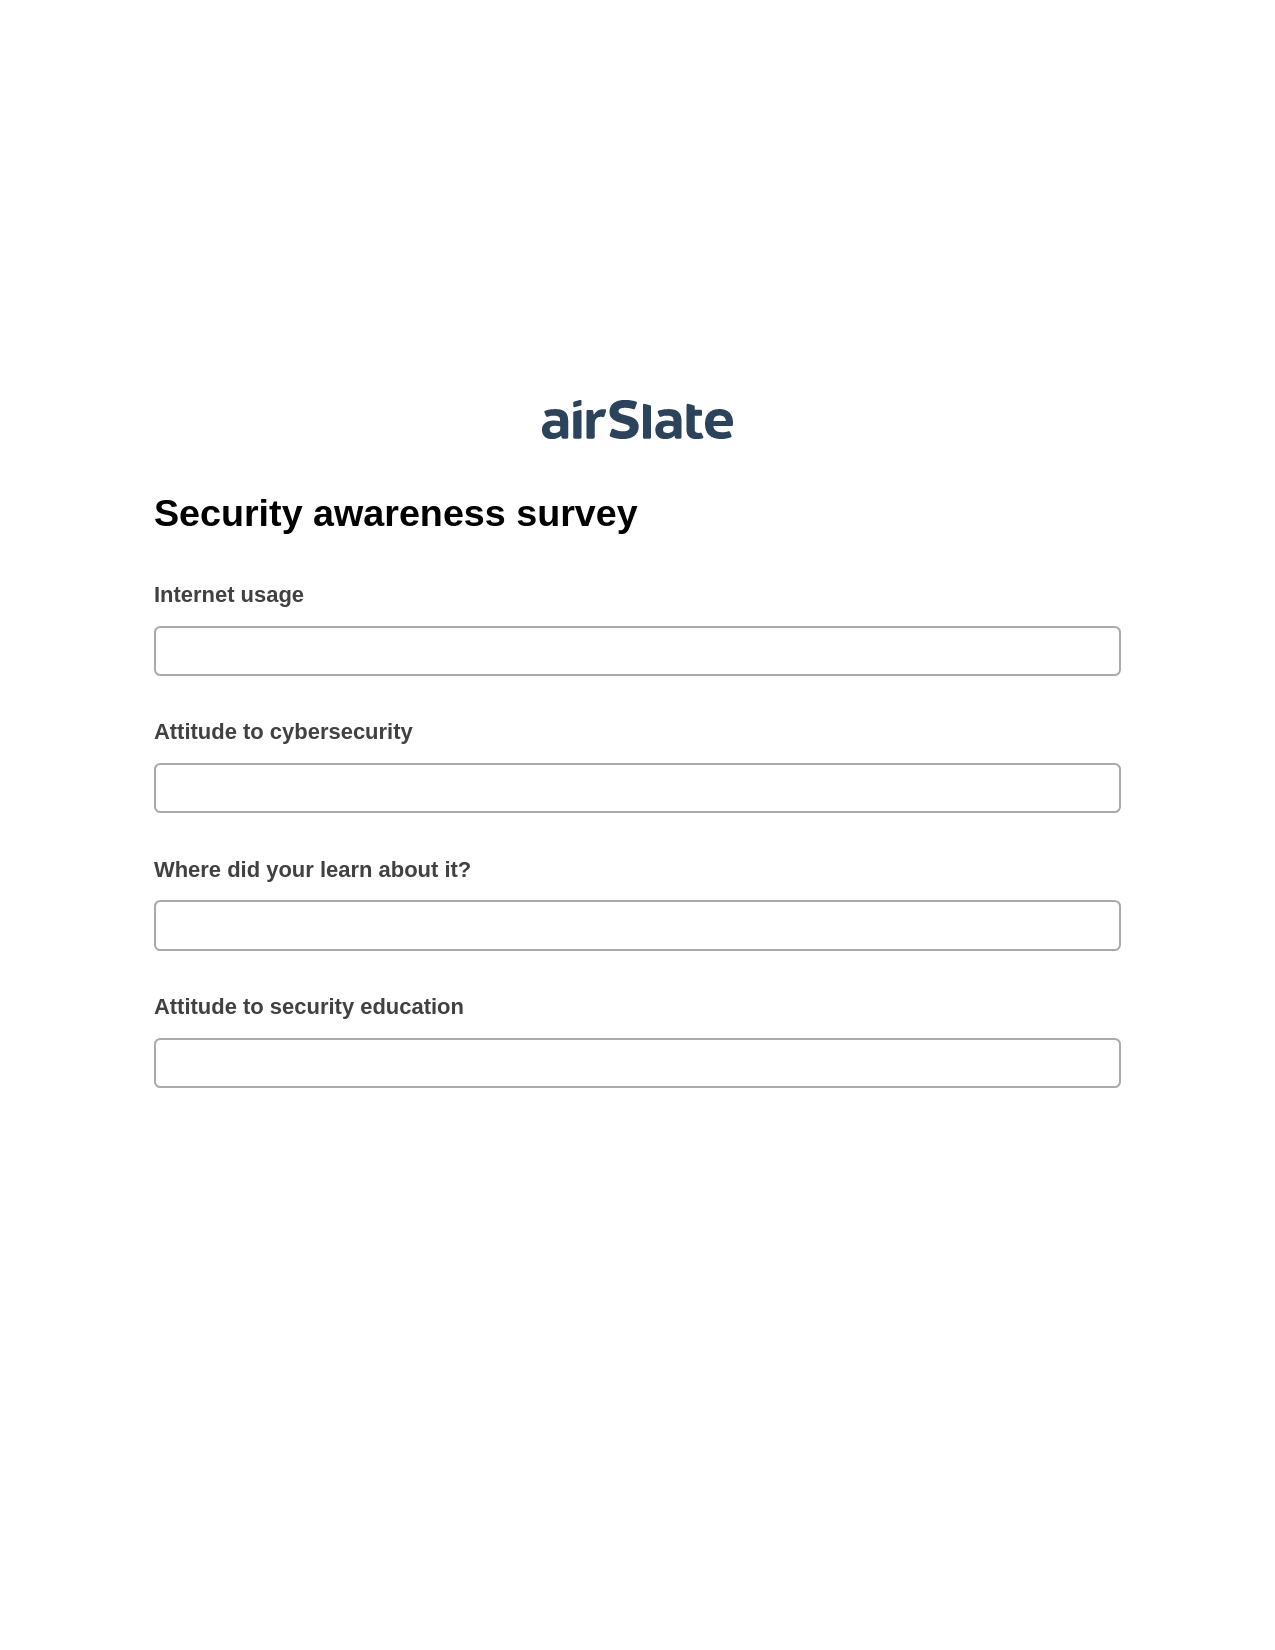 Security awareness survey Pre-fill from MySQL Dropdown Options Bot, Document Hide Bot, Slack Two-Way Binding Bot